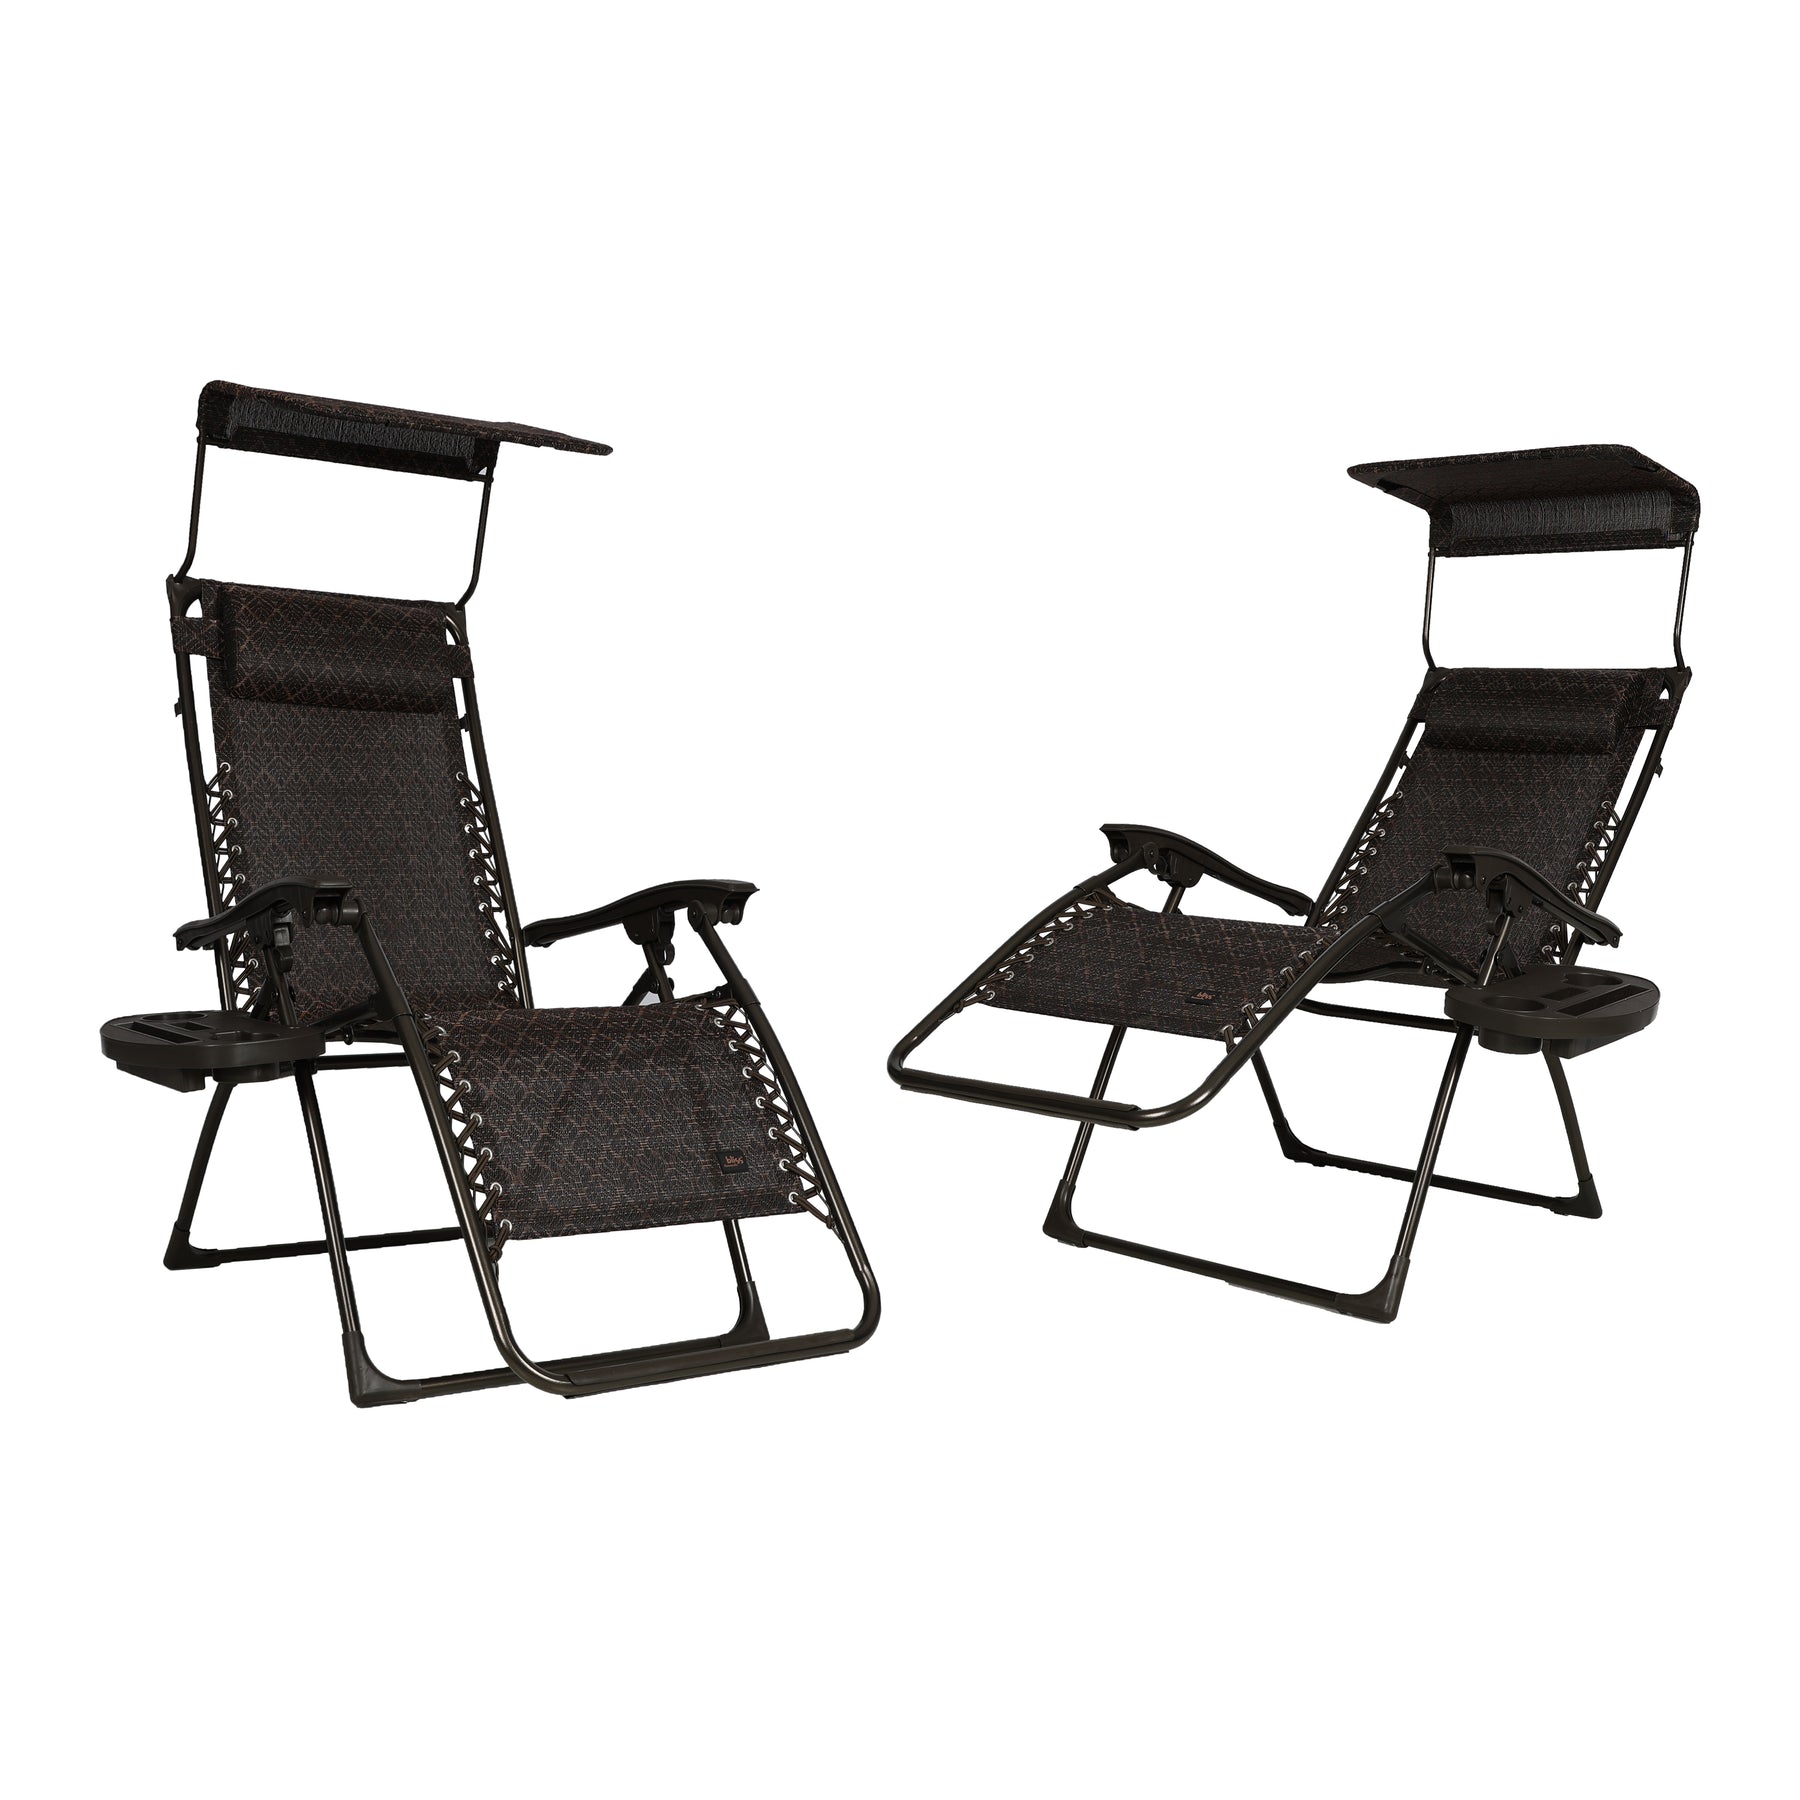 Bliss Hammocks Set of 2 26-inch Zero Gravity Chairs with Adjustable Canopy Sun-Shade, Drink Tray, and Pillow. Brown Leaves variation is a dark brown color with a leaf pattern.